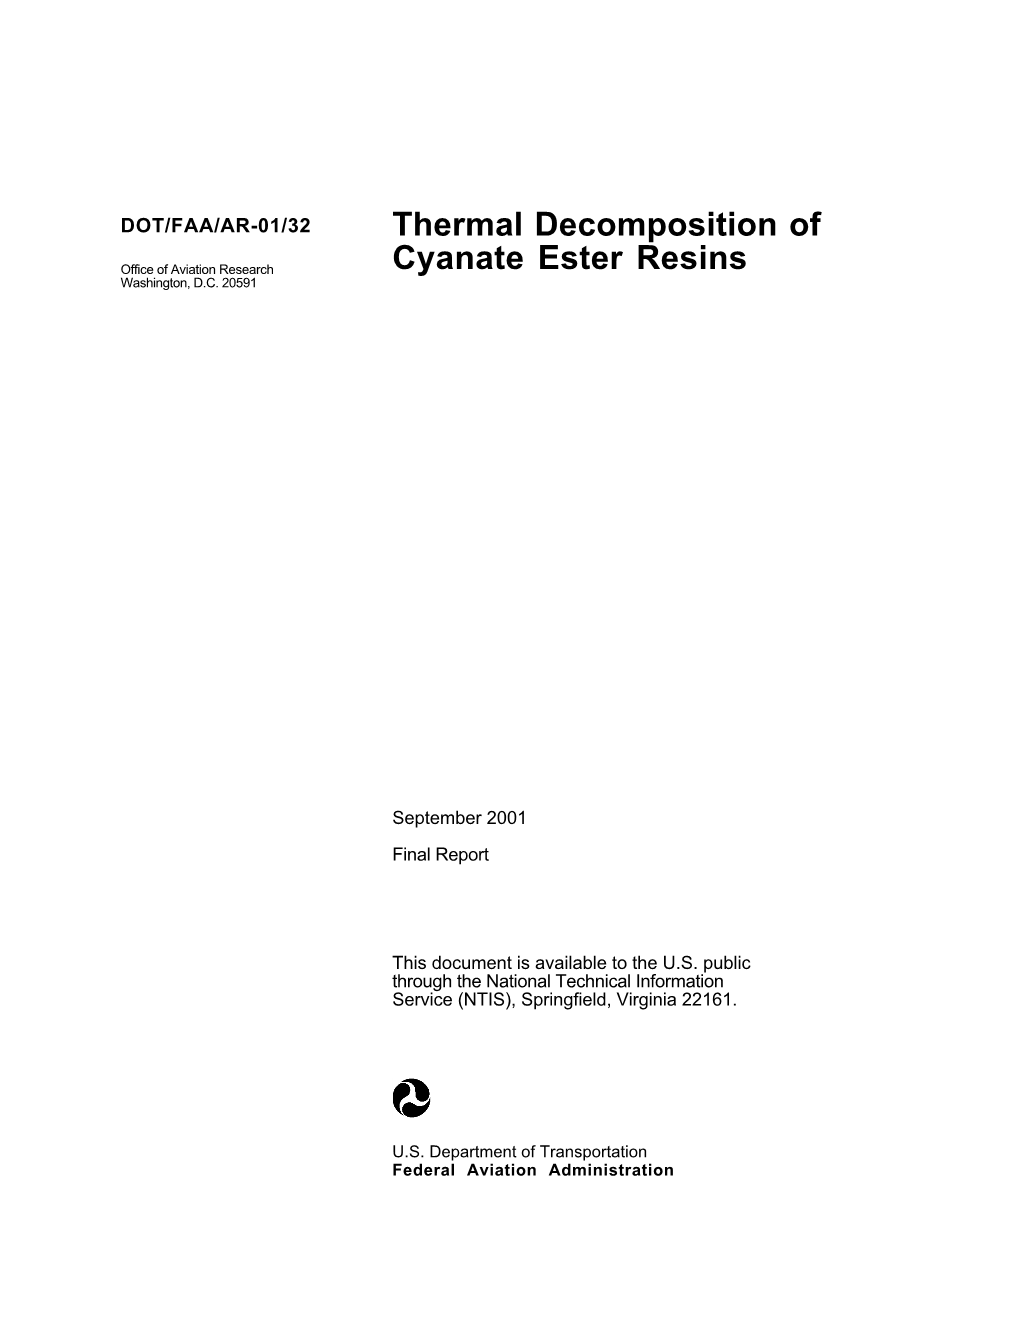 THERMAL DECOMPOSITION of CYANATE ESTER RESINS September 2001 6